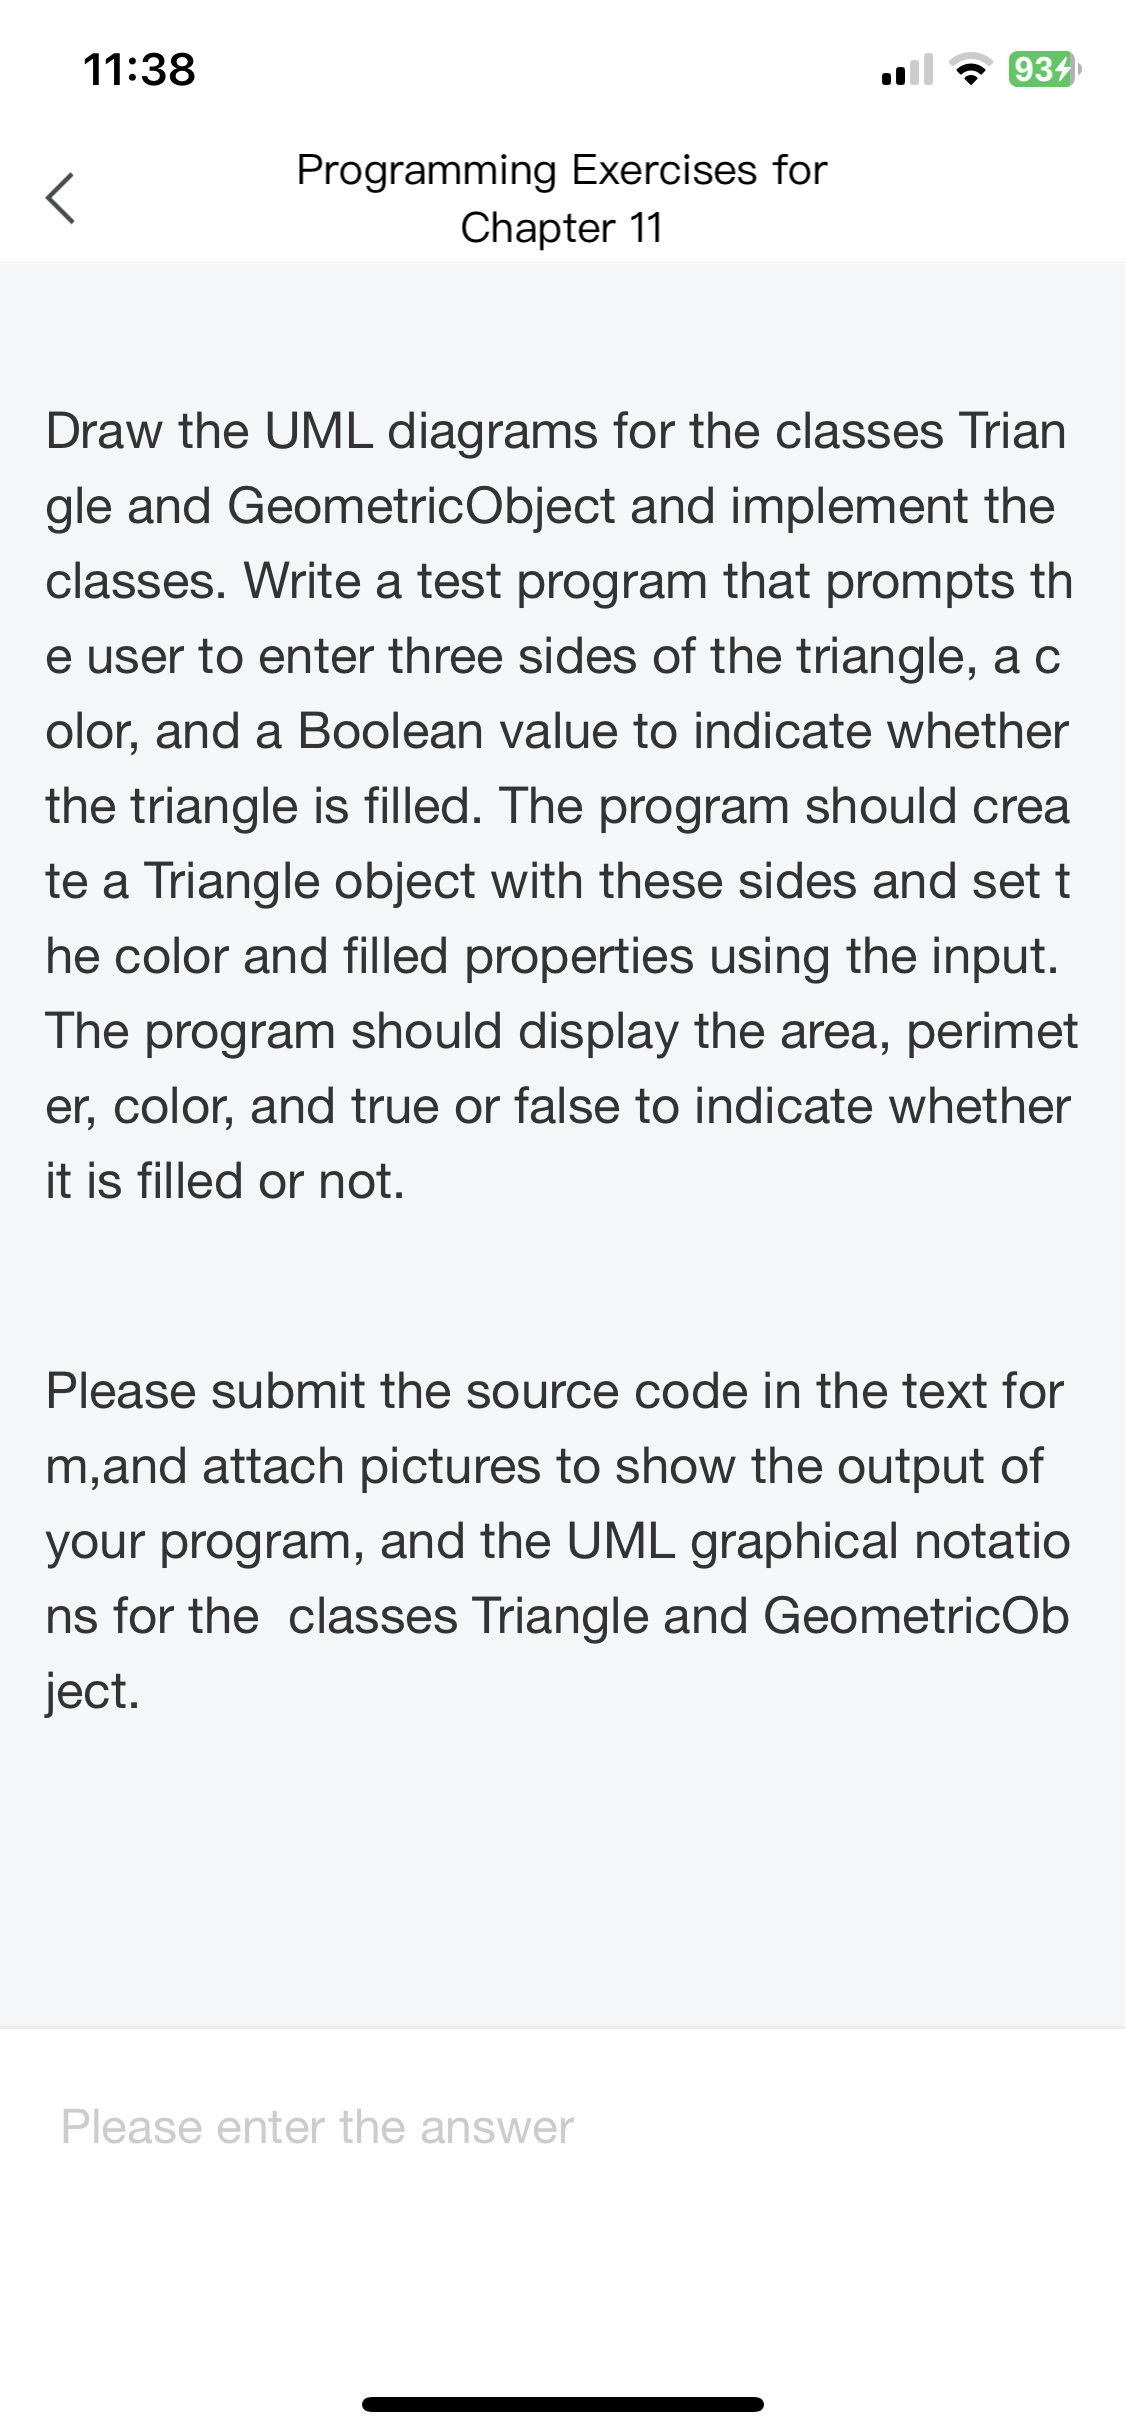 11:38
<
Programming Exercises for
Chapter 11
934
Draw the UML diagrams for the classes Trian
gle and GeometricObject and implement the
classes. Write a test program that prompts th
e user to enter three sides of the triangle, a c
olor, and a Boolean value to indicate whether
the triangle is filled. The program should crea
te a Triangle object with these sides and set t
he color and filled properties using the input.
The program should display the area, perimet
er, color, and true or false to indicate whether
it is filled or not.
Please submit the source code in the text for
m, and attach pictures to show the output of
your program, and the UML graphical notatio
ns for the classes Triangle and GeometricOb
ject.
Please enter the answer